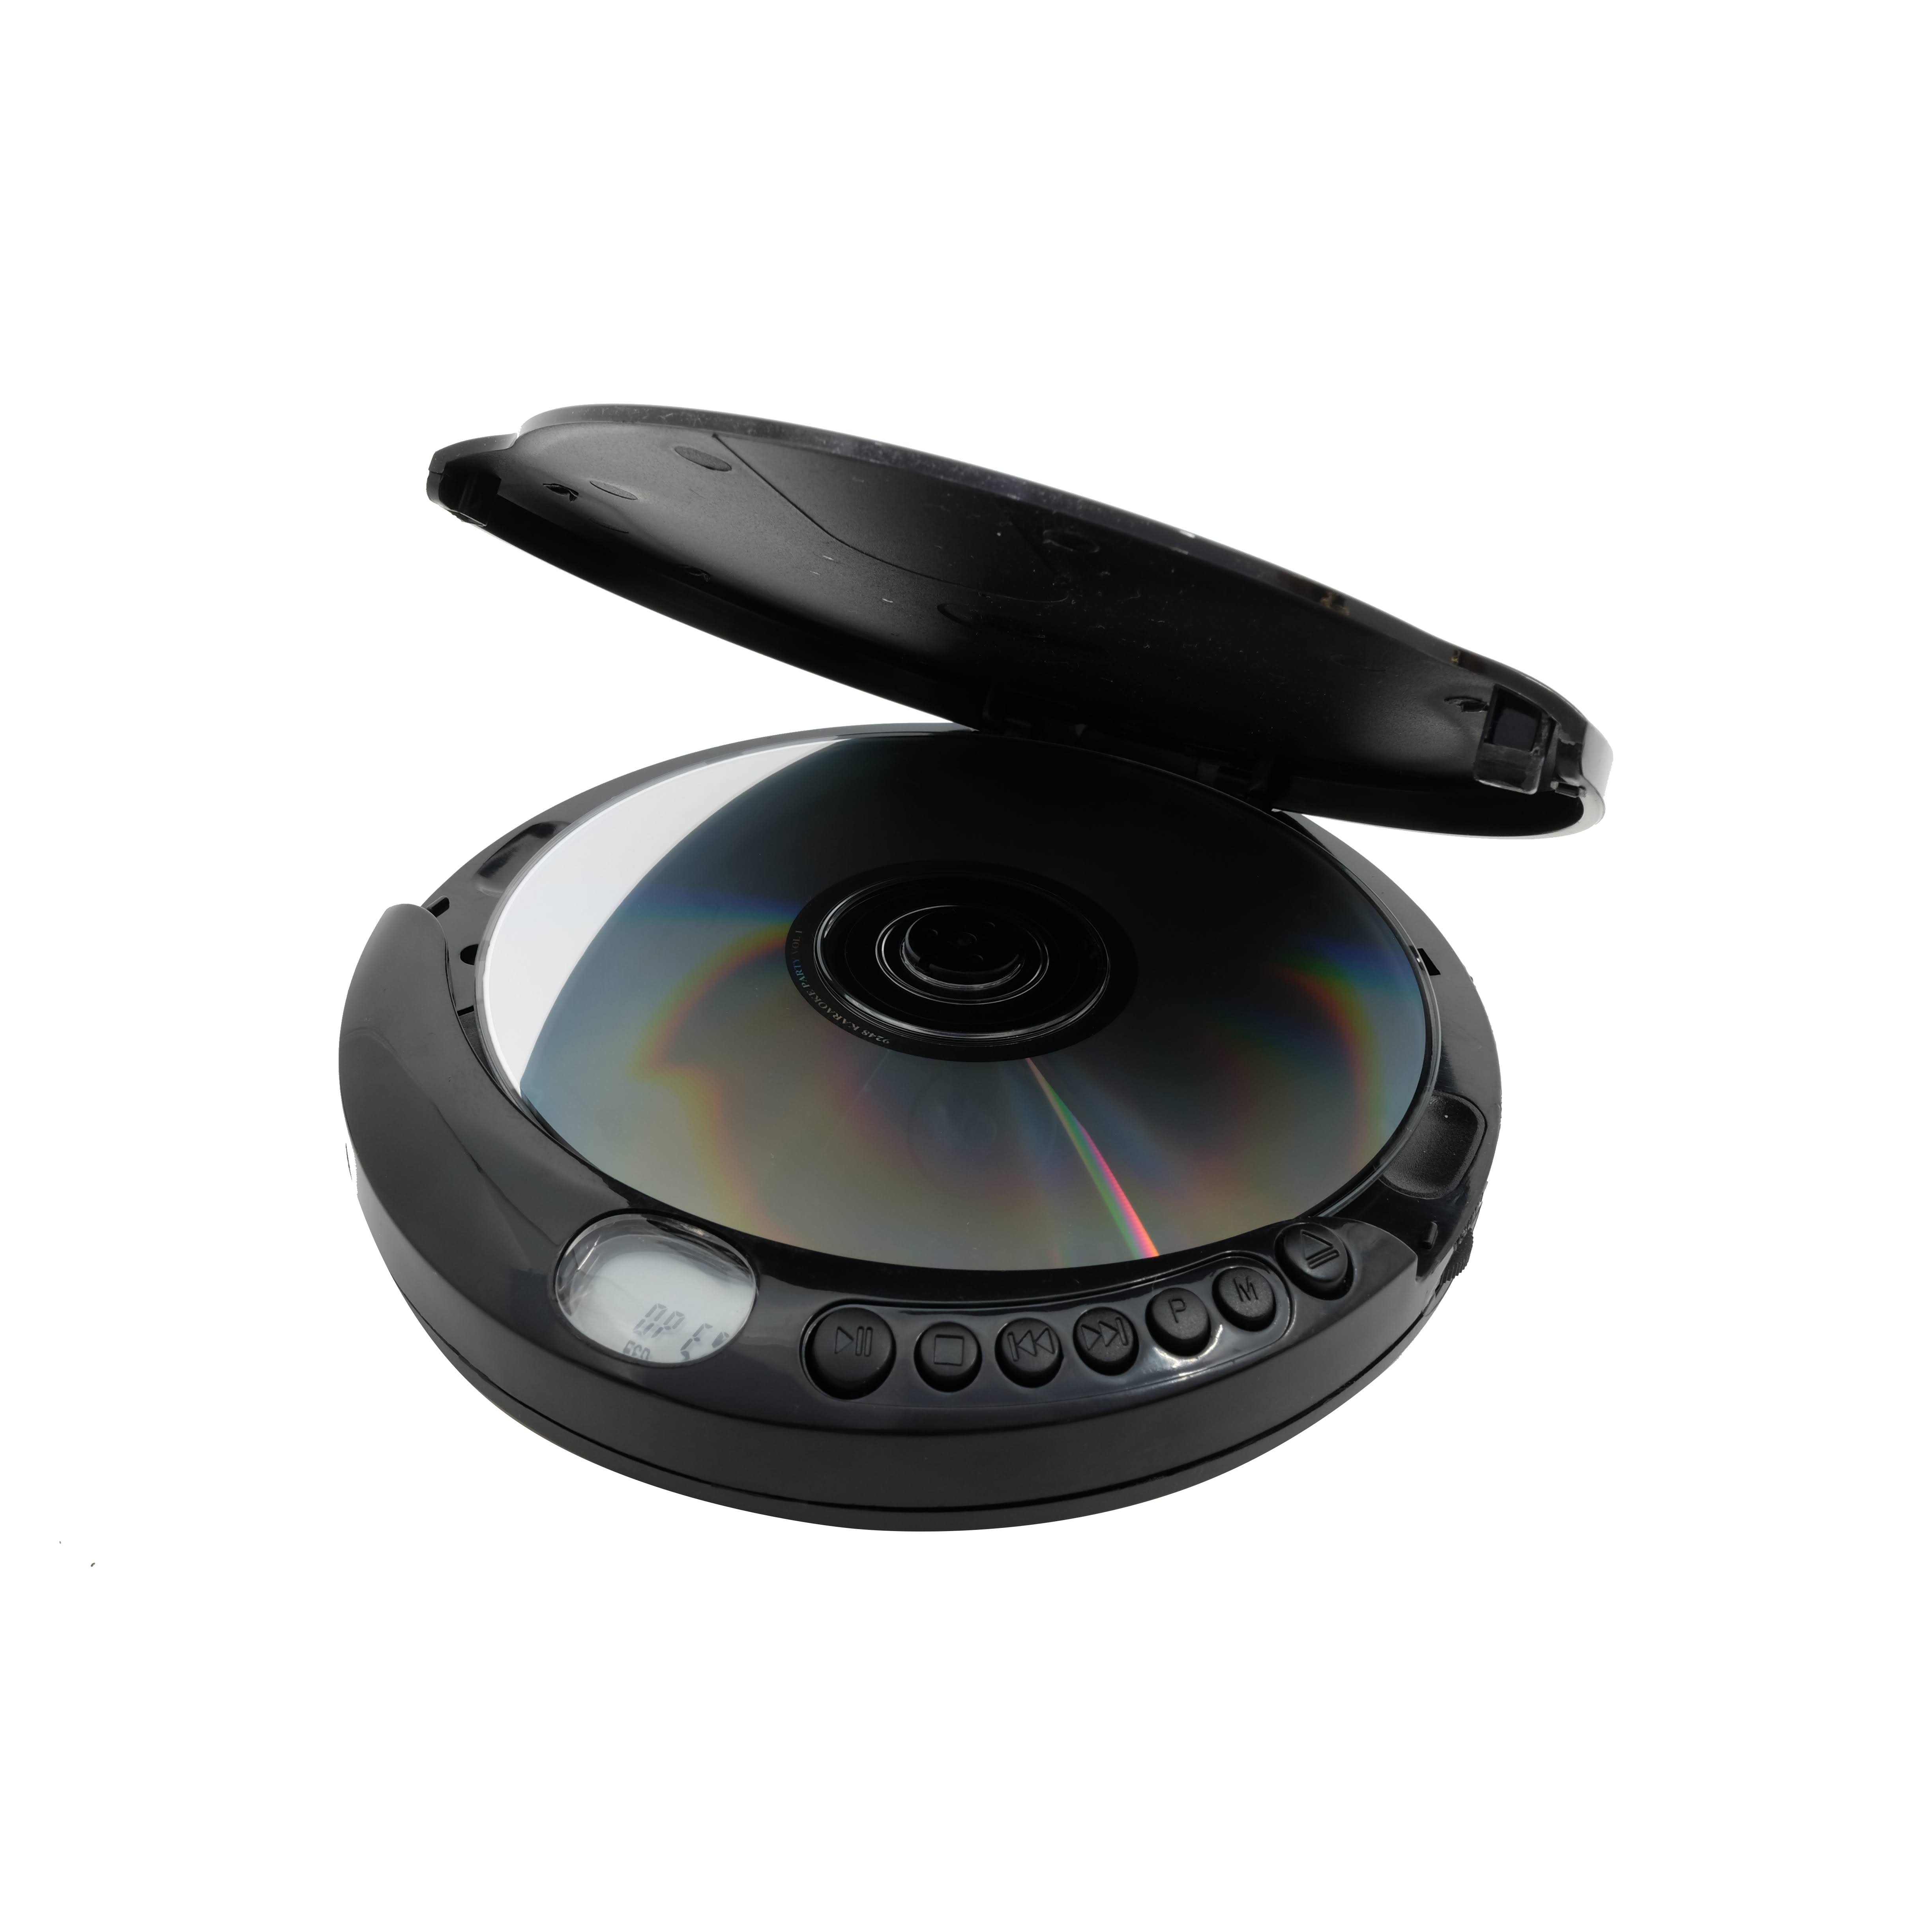 Proscan Personal CD Player with 1-cm (0.4-in) Display - Black